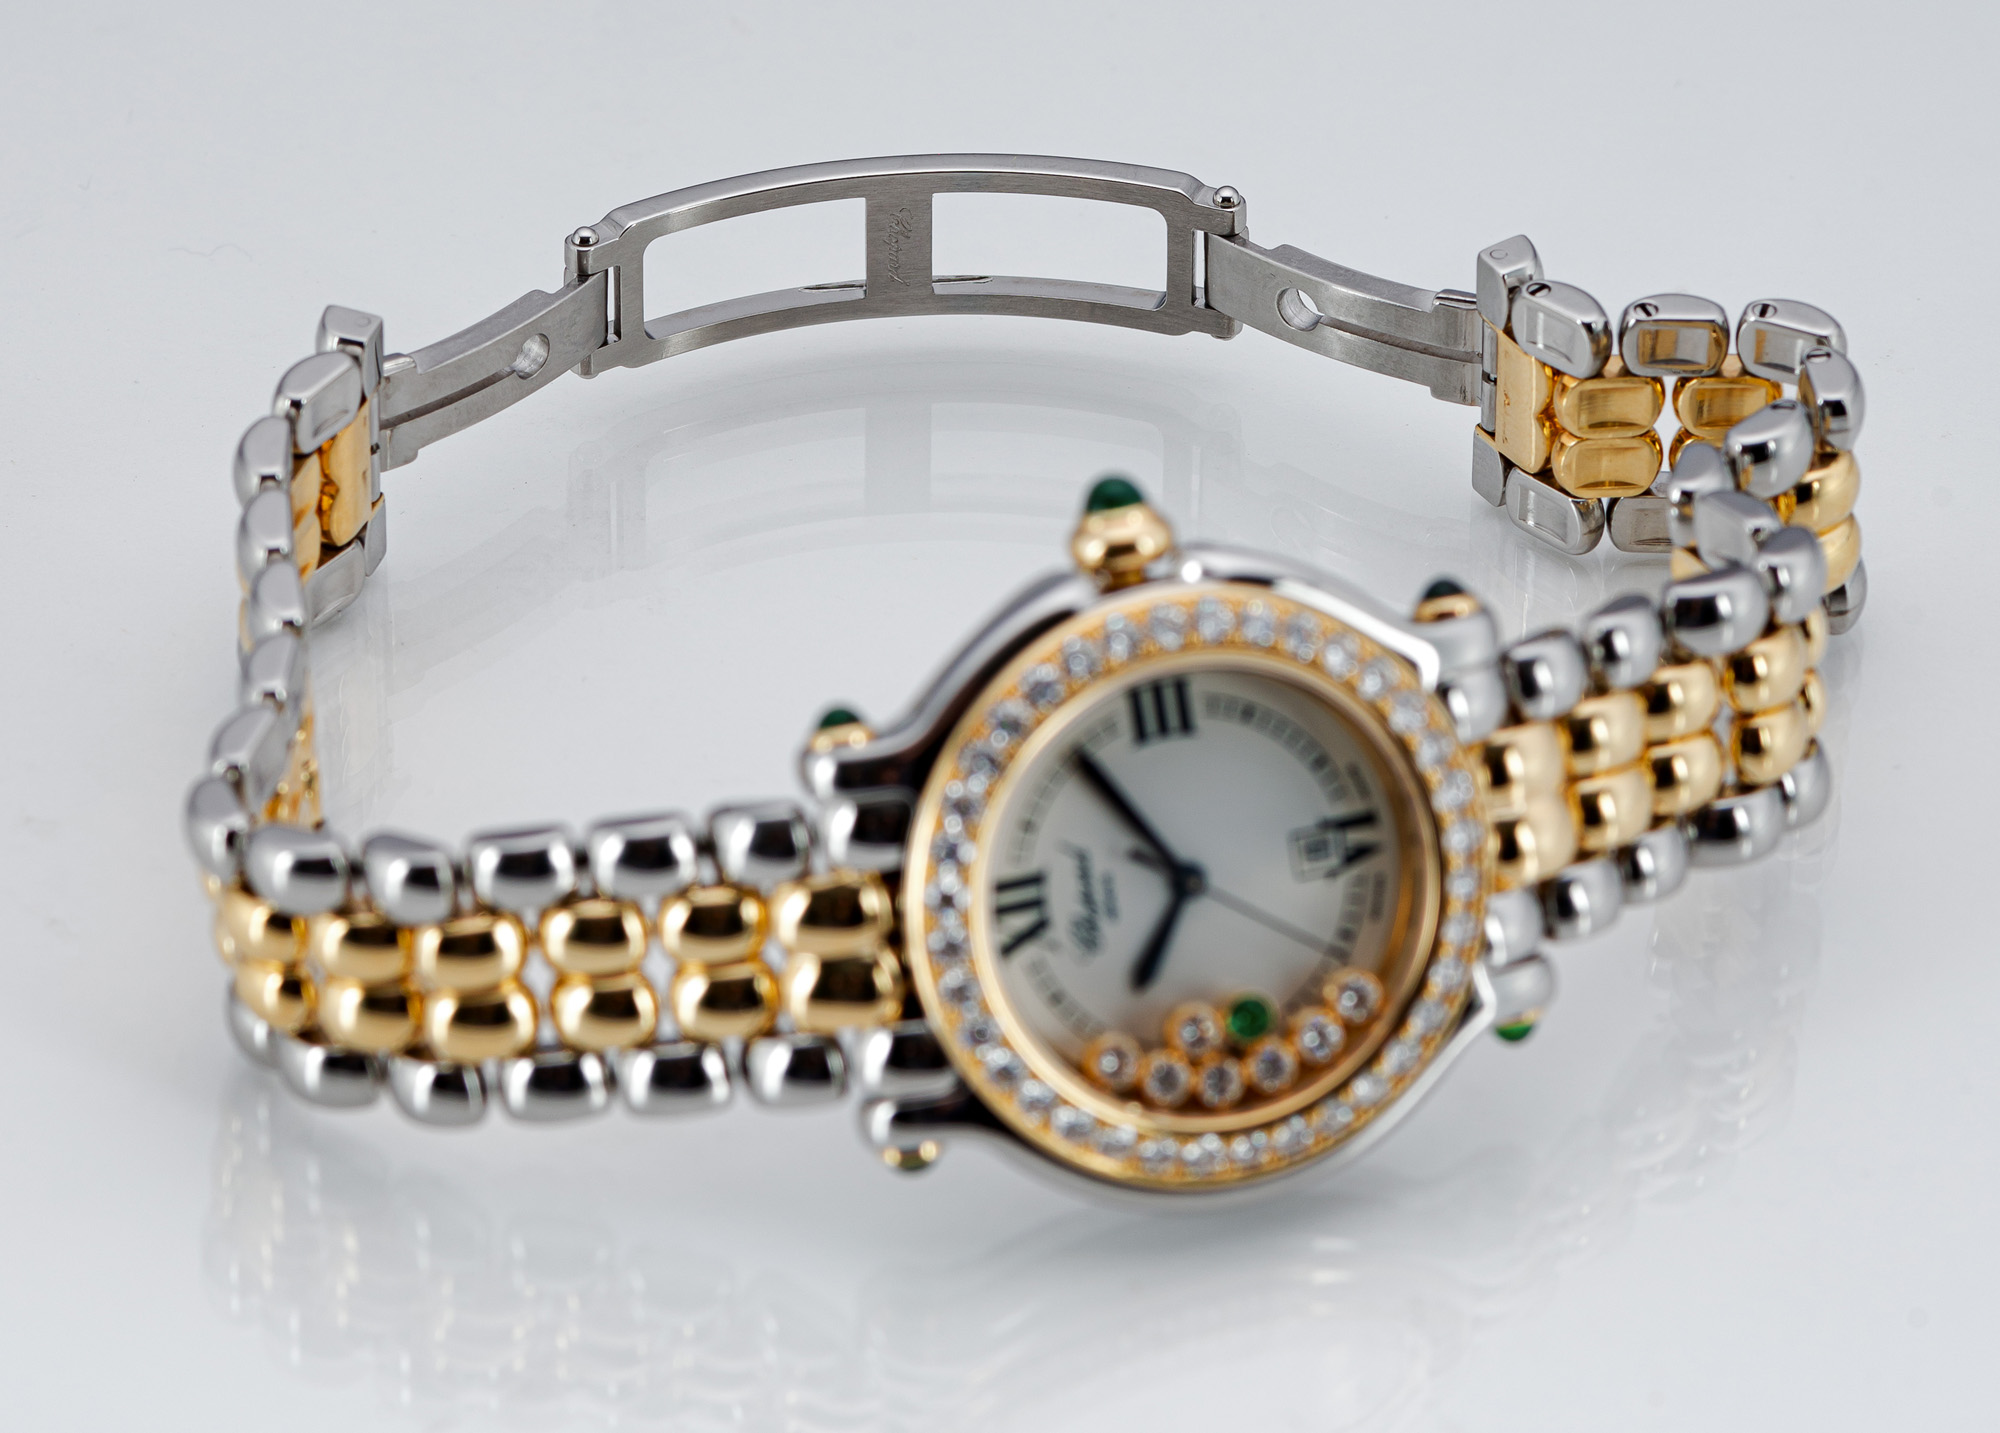 A CHOPARD LADY'S WATCH - Image 3 of 5